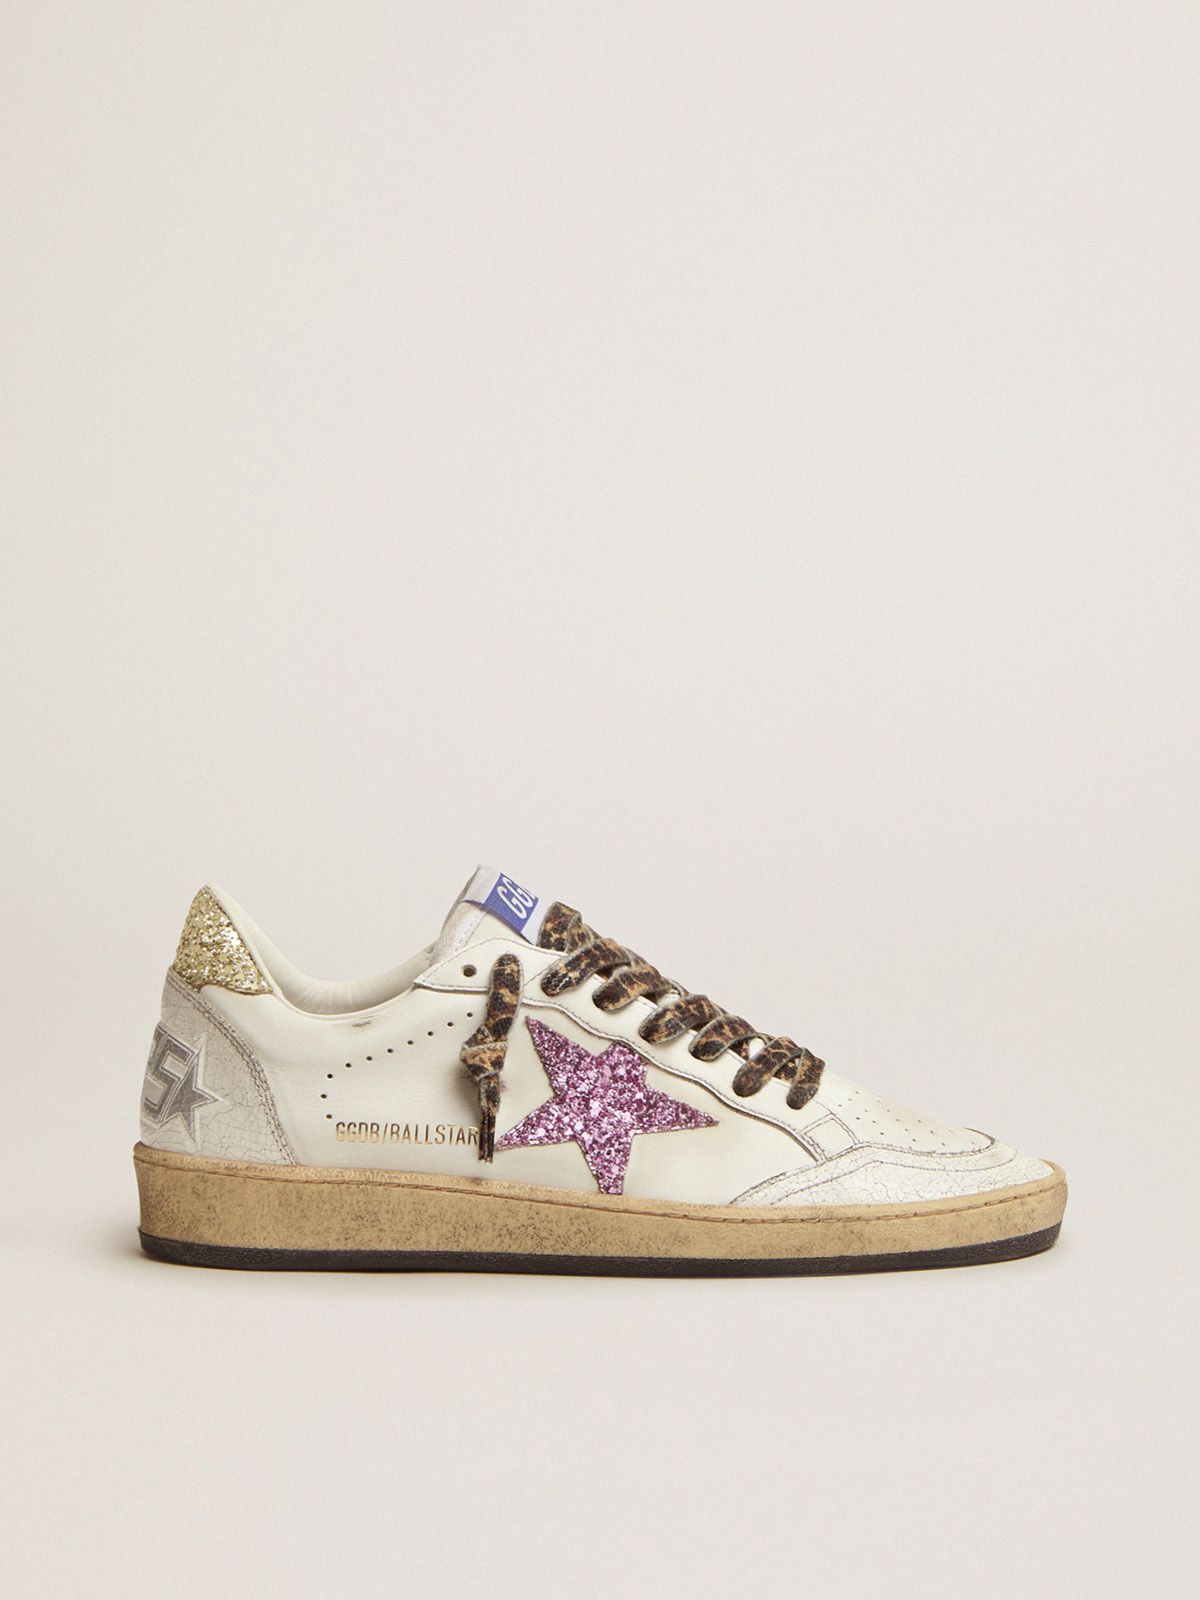 Ball Star LTD sneakers in white leather with colored glitter heel tab and star | 